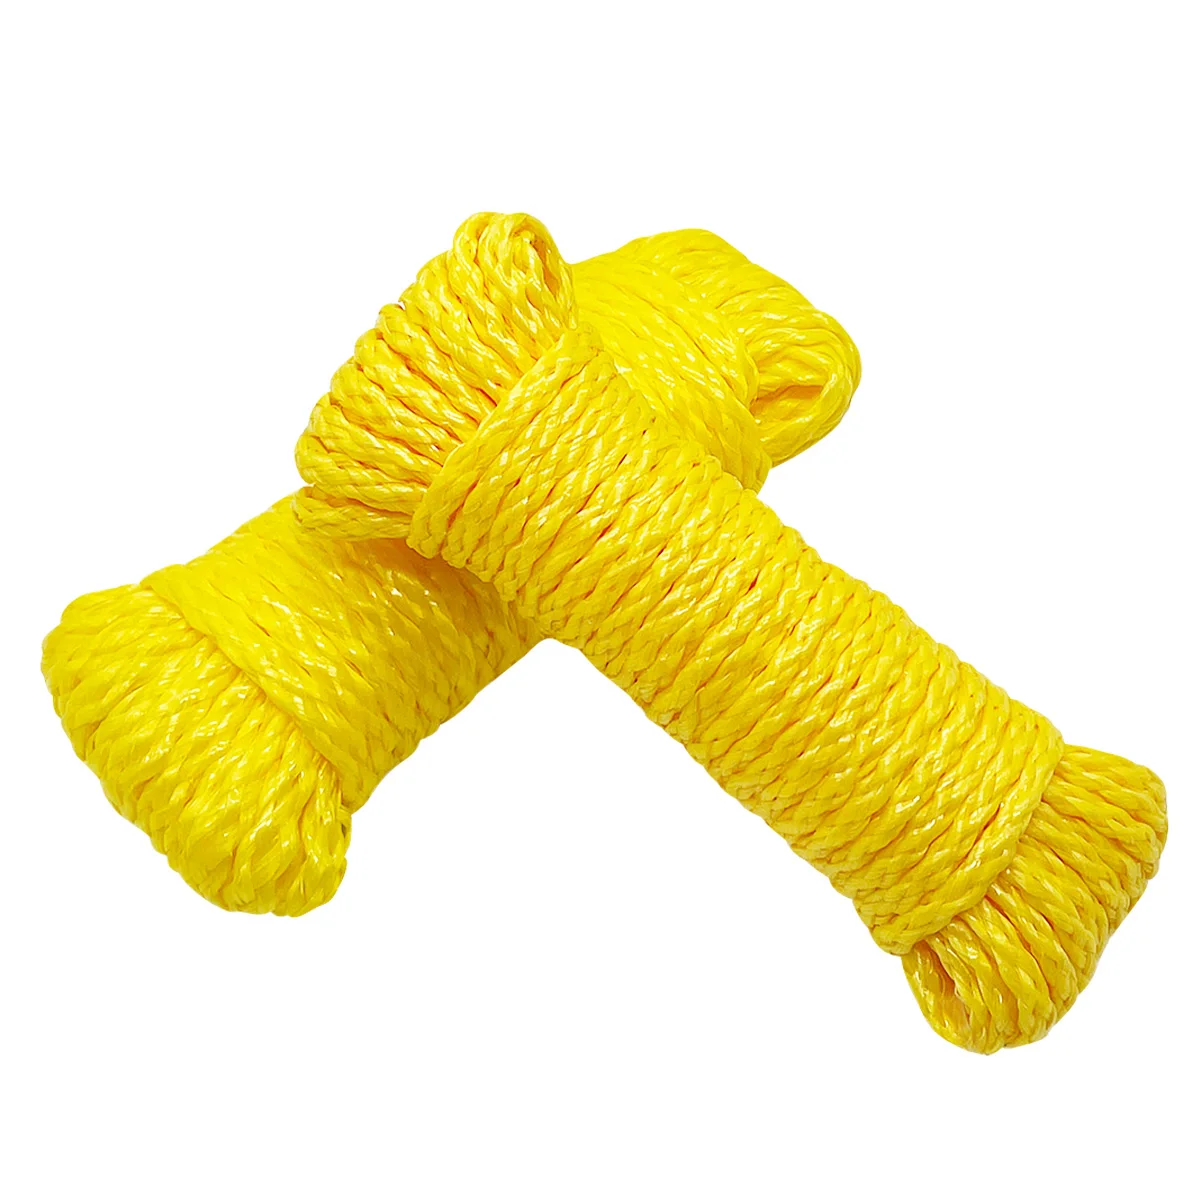 Hollow braided Polypropylene pp floating rope